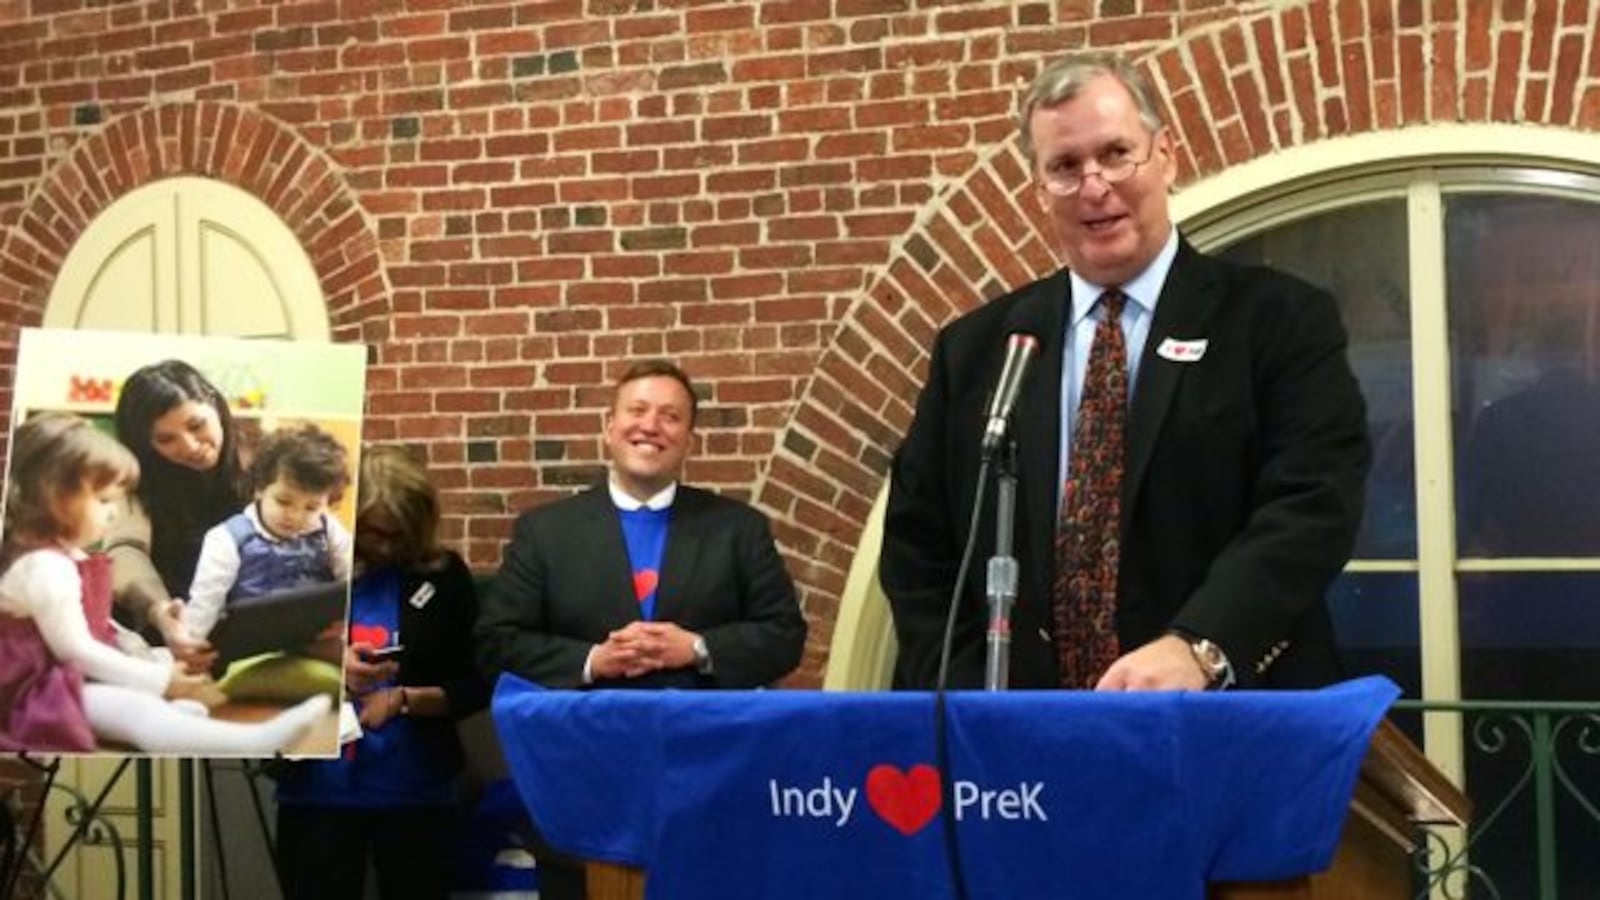 Indianapolis Deputy Mayor Jason Kloth looks on while Mayor Greg Ballard speaks at a December 2014 rally in support of his proposed preschool tuition program.